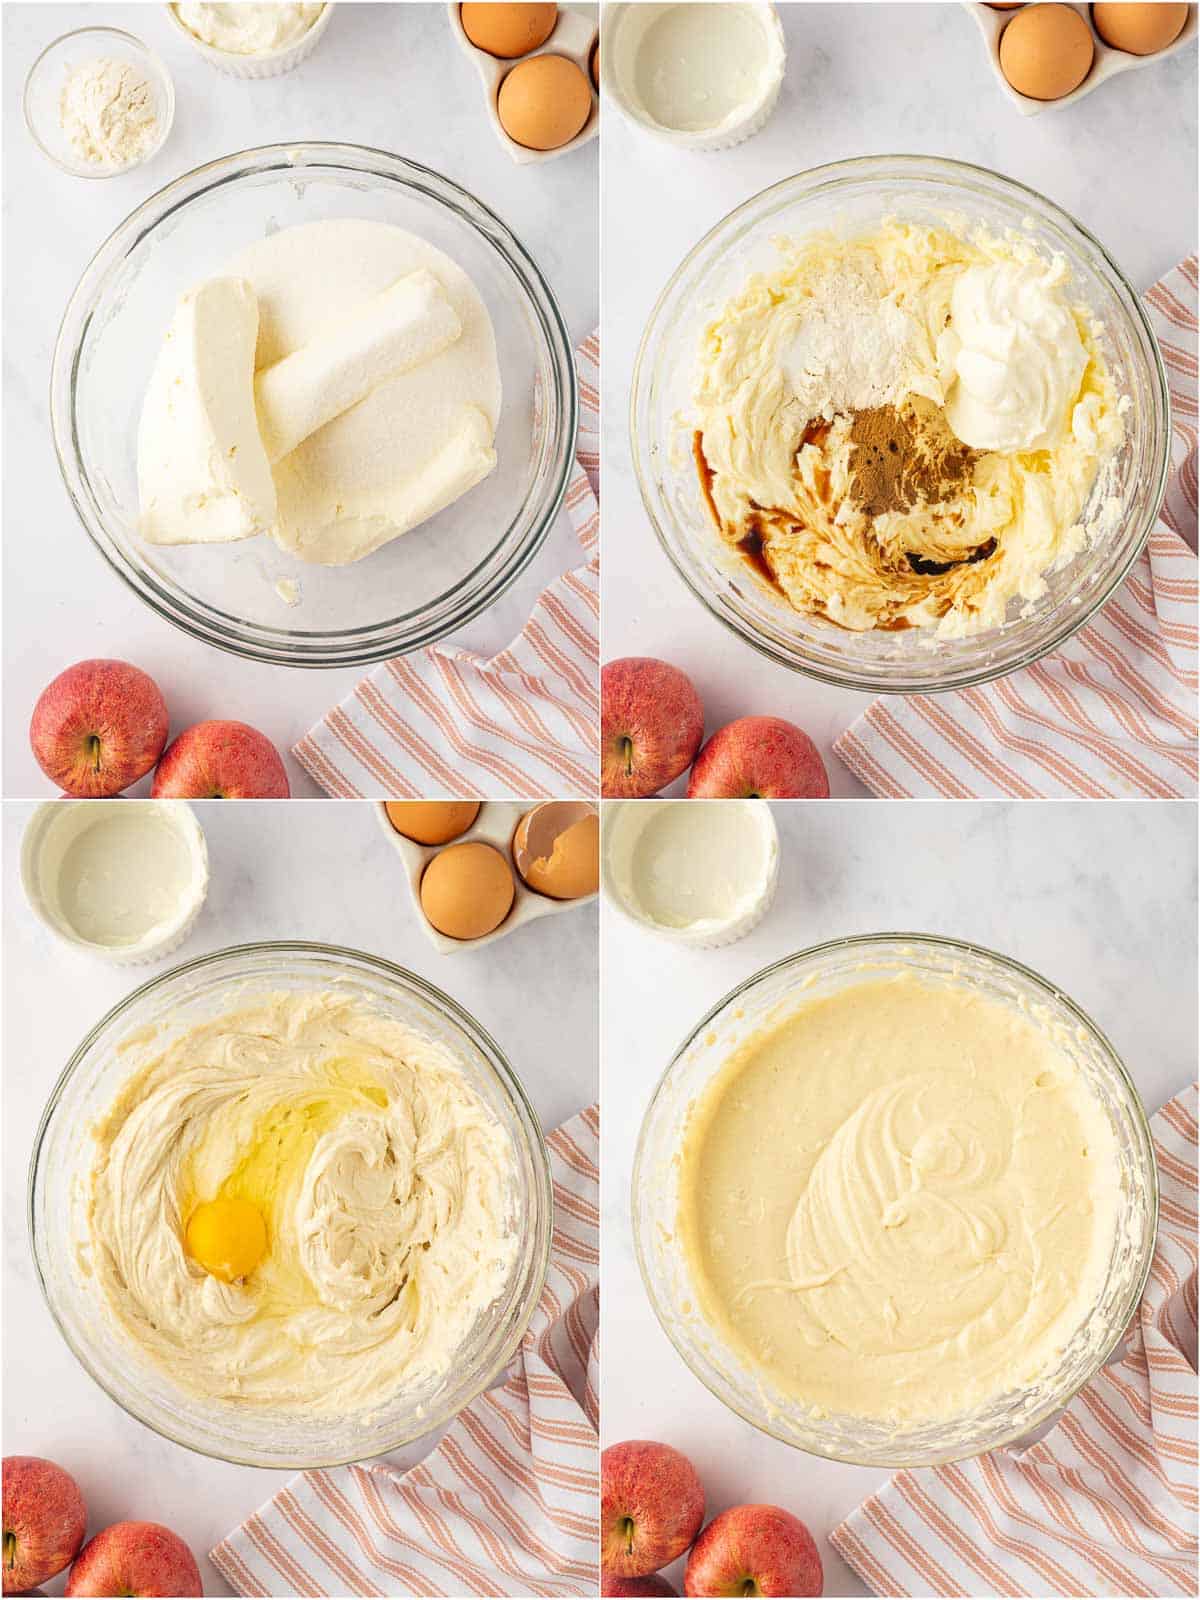 How to mix the creamy cheesecake filling.